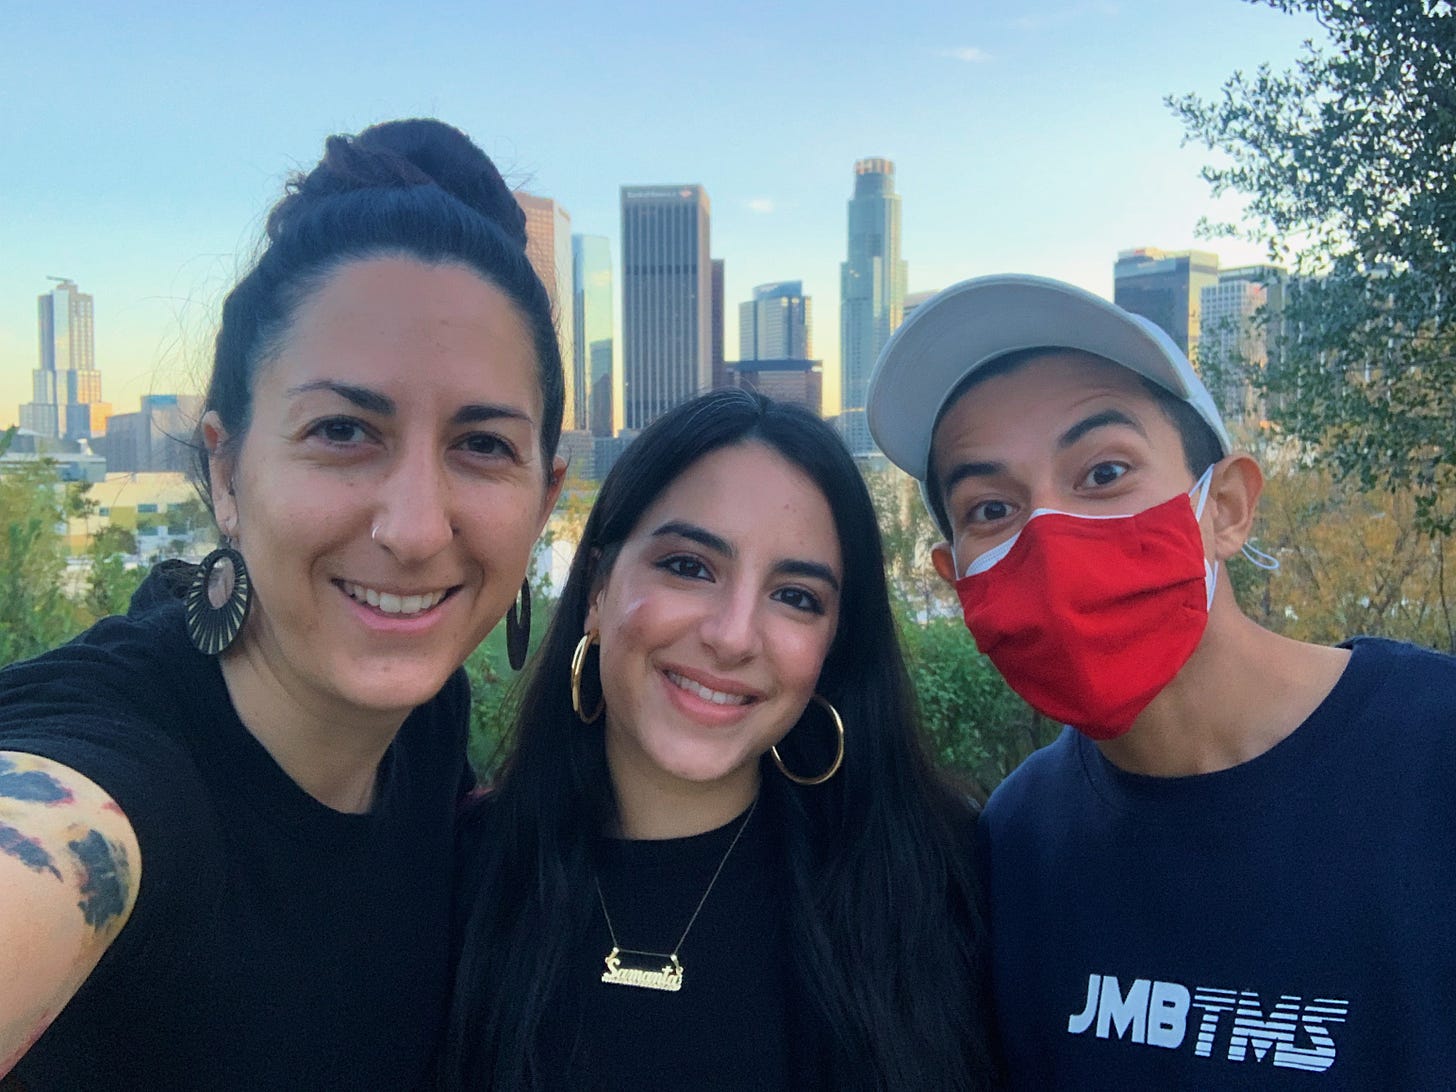 Selfie of Ali, Samanta, and J.T. smiling at the camera with the downtown LA skyline in the background at dusk.